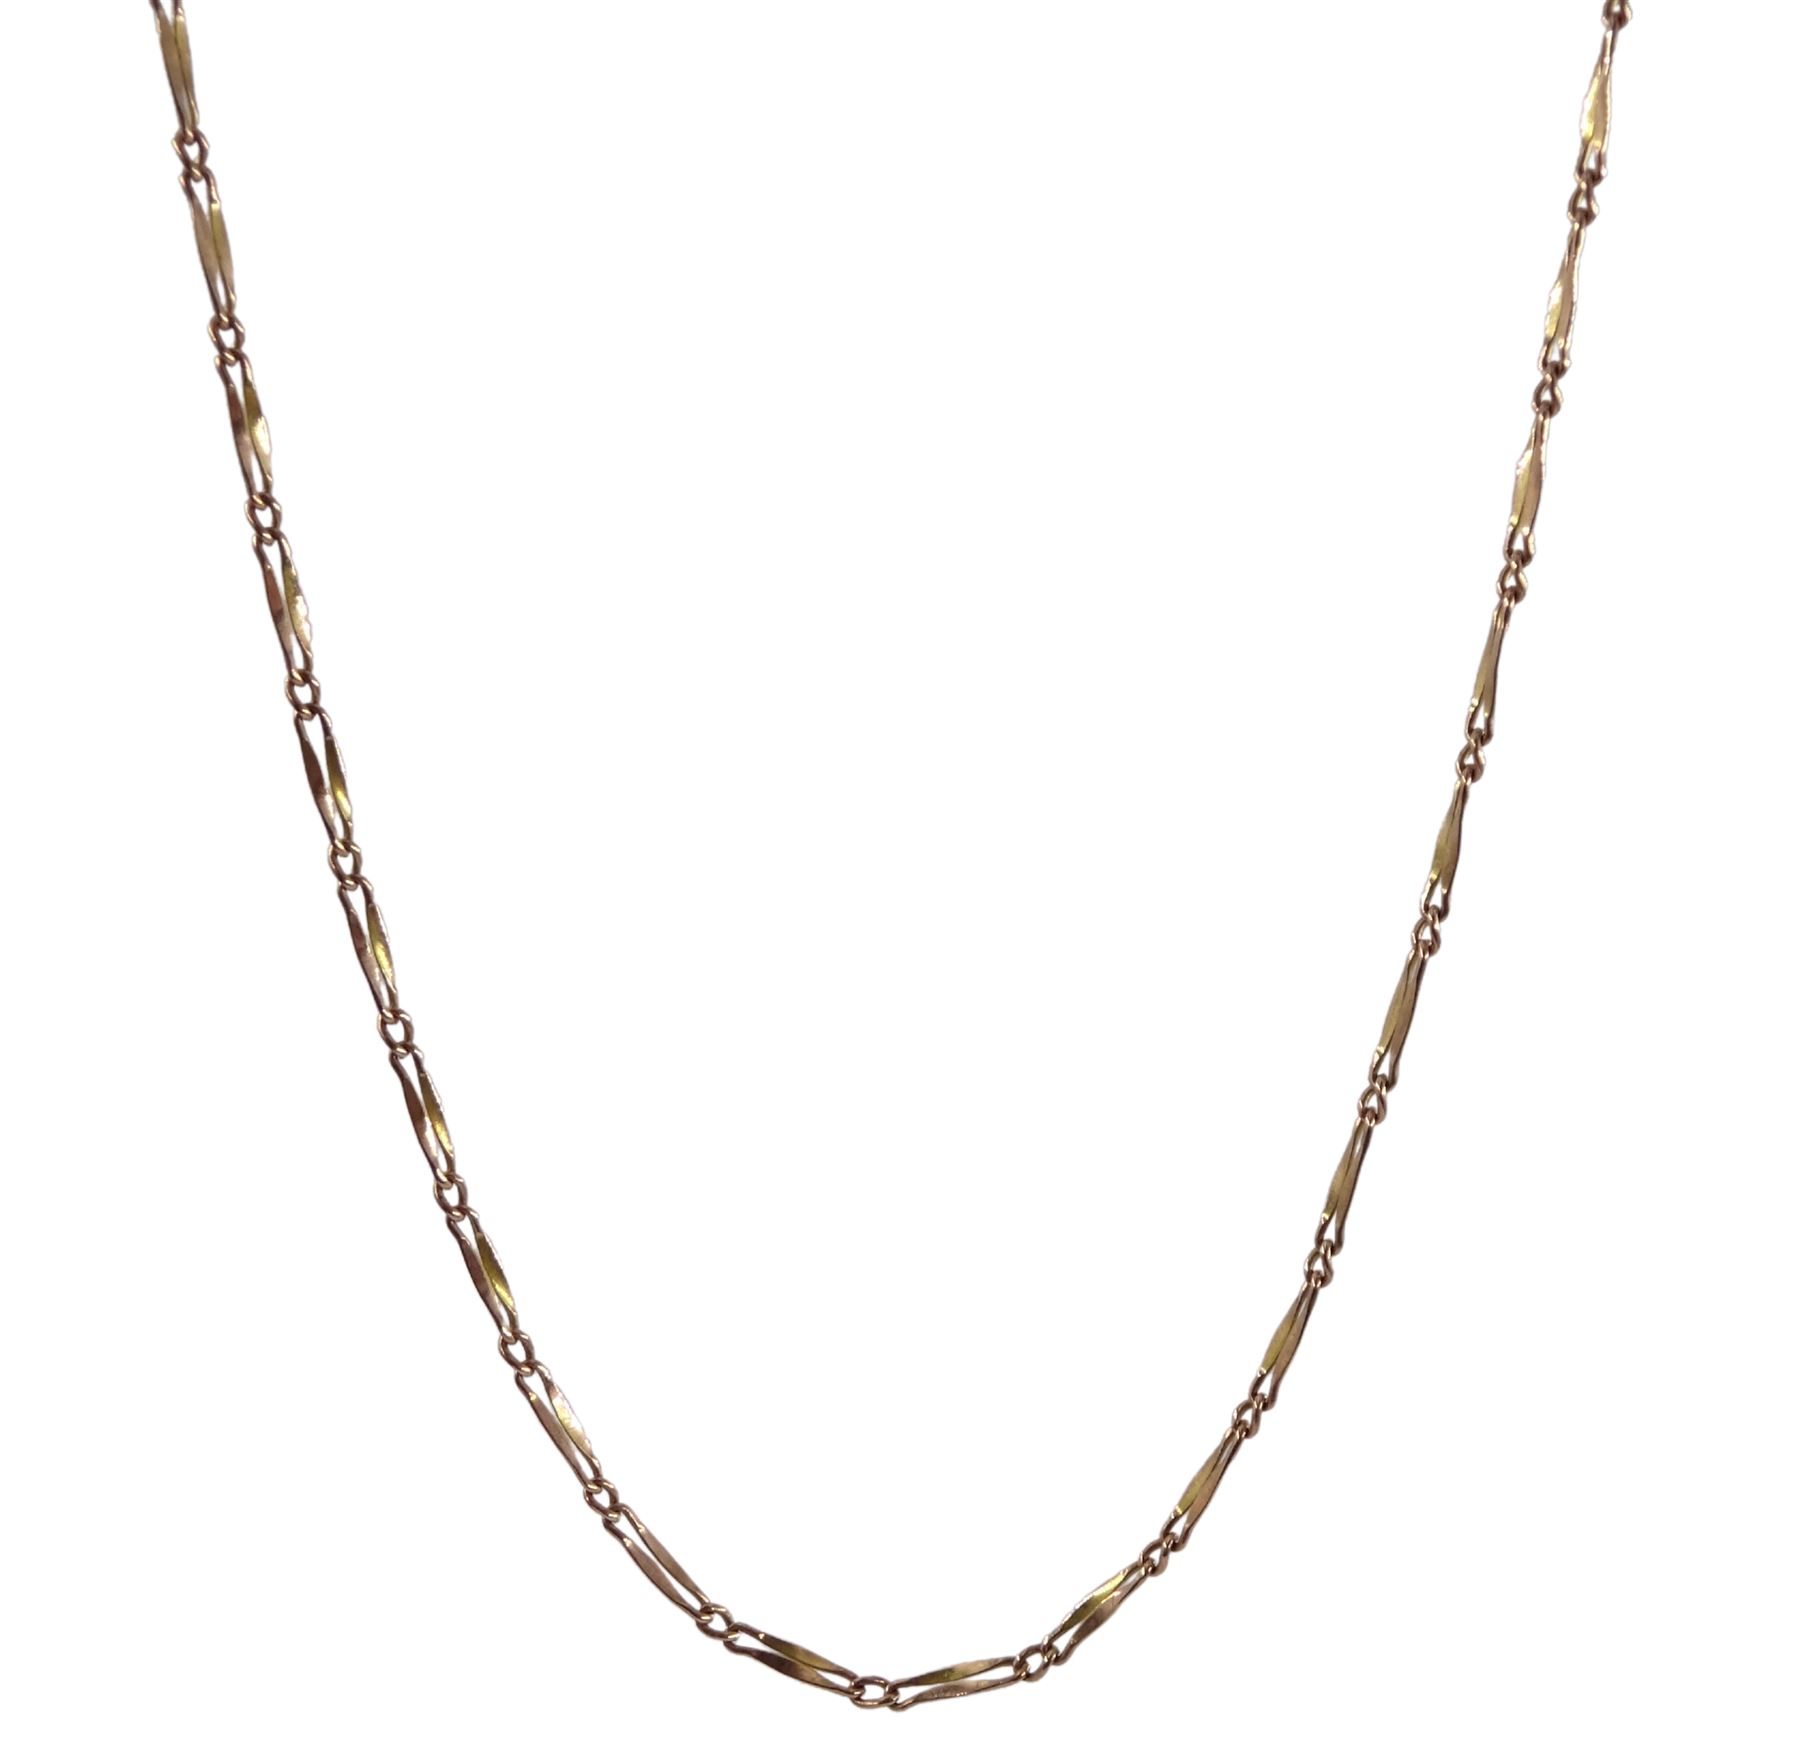 Early 20th rose gold rectangular bar link necklace